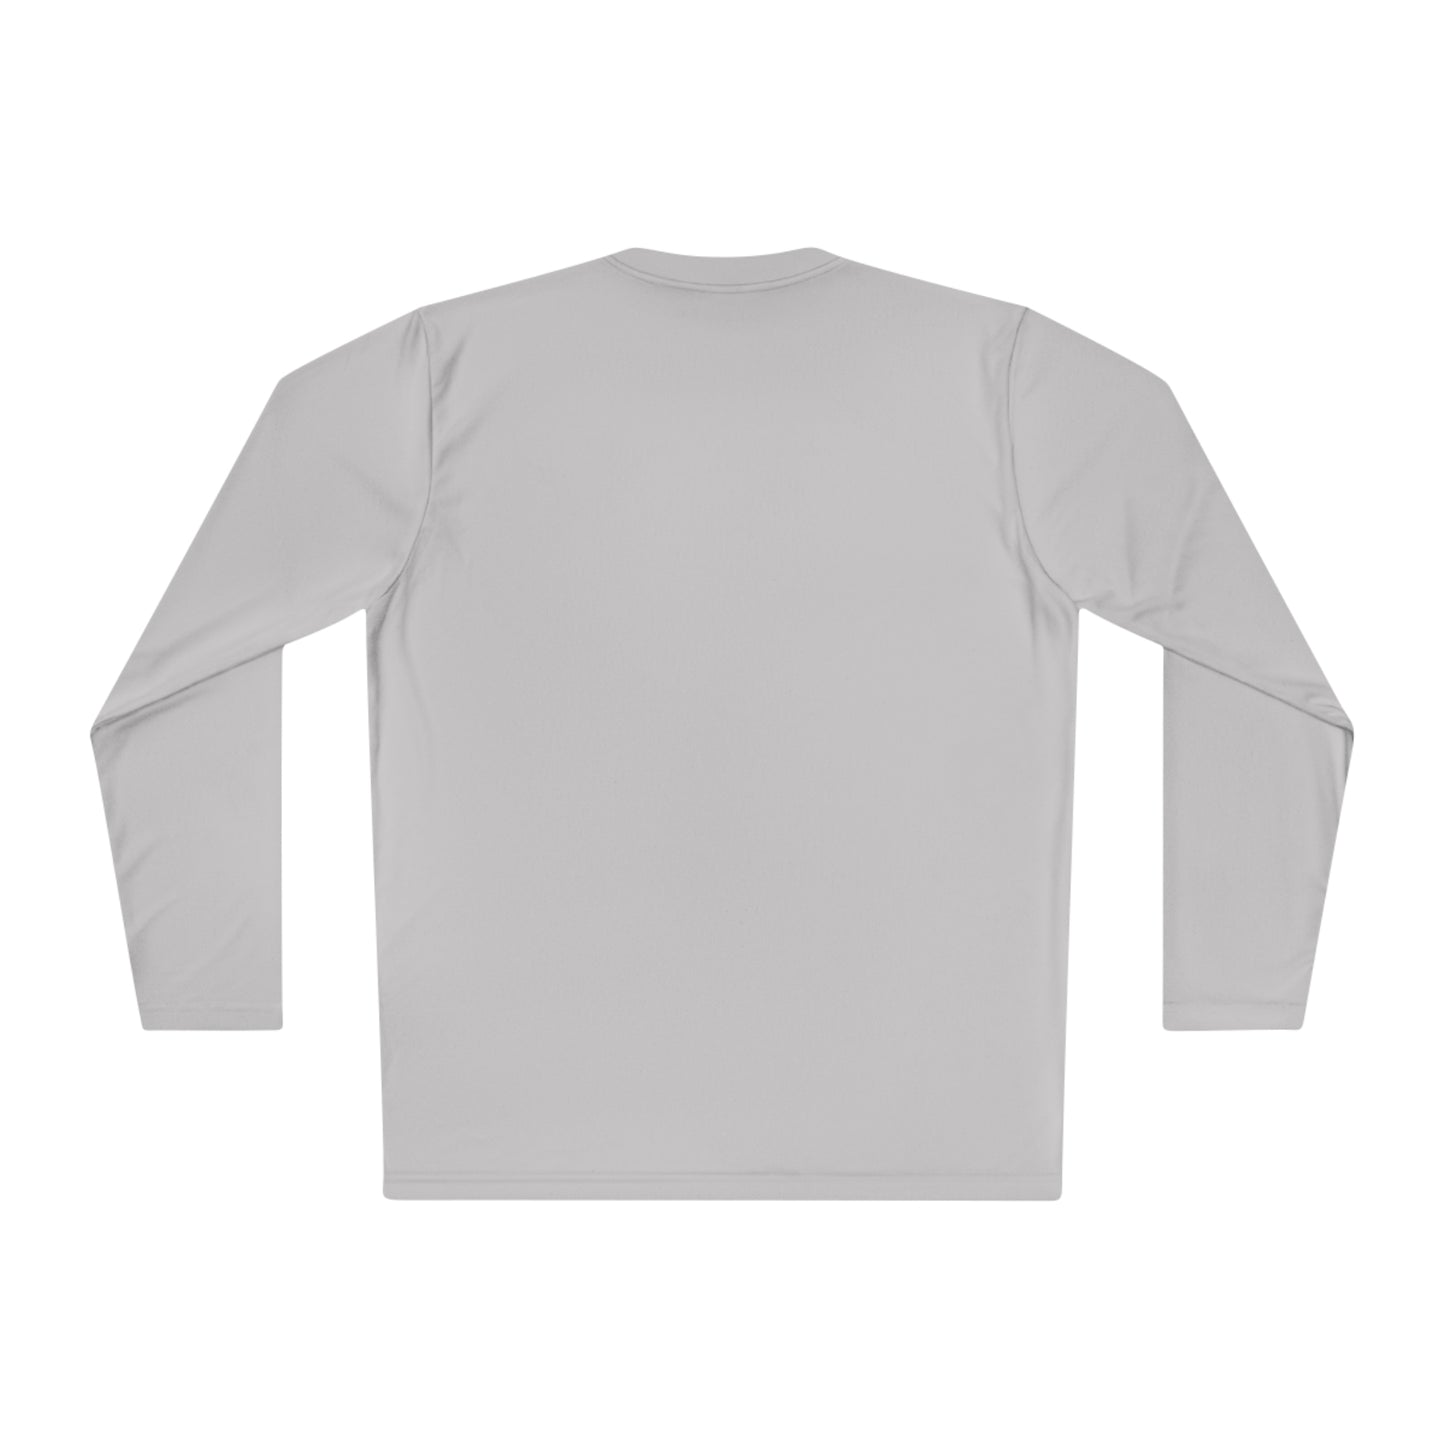 Always remember to leave some Ball Butter in the tank Lightweight Long Sleeve Tee